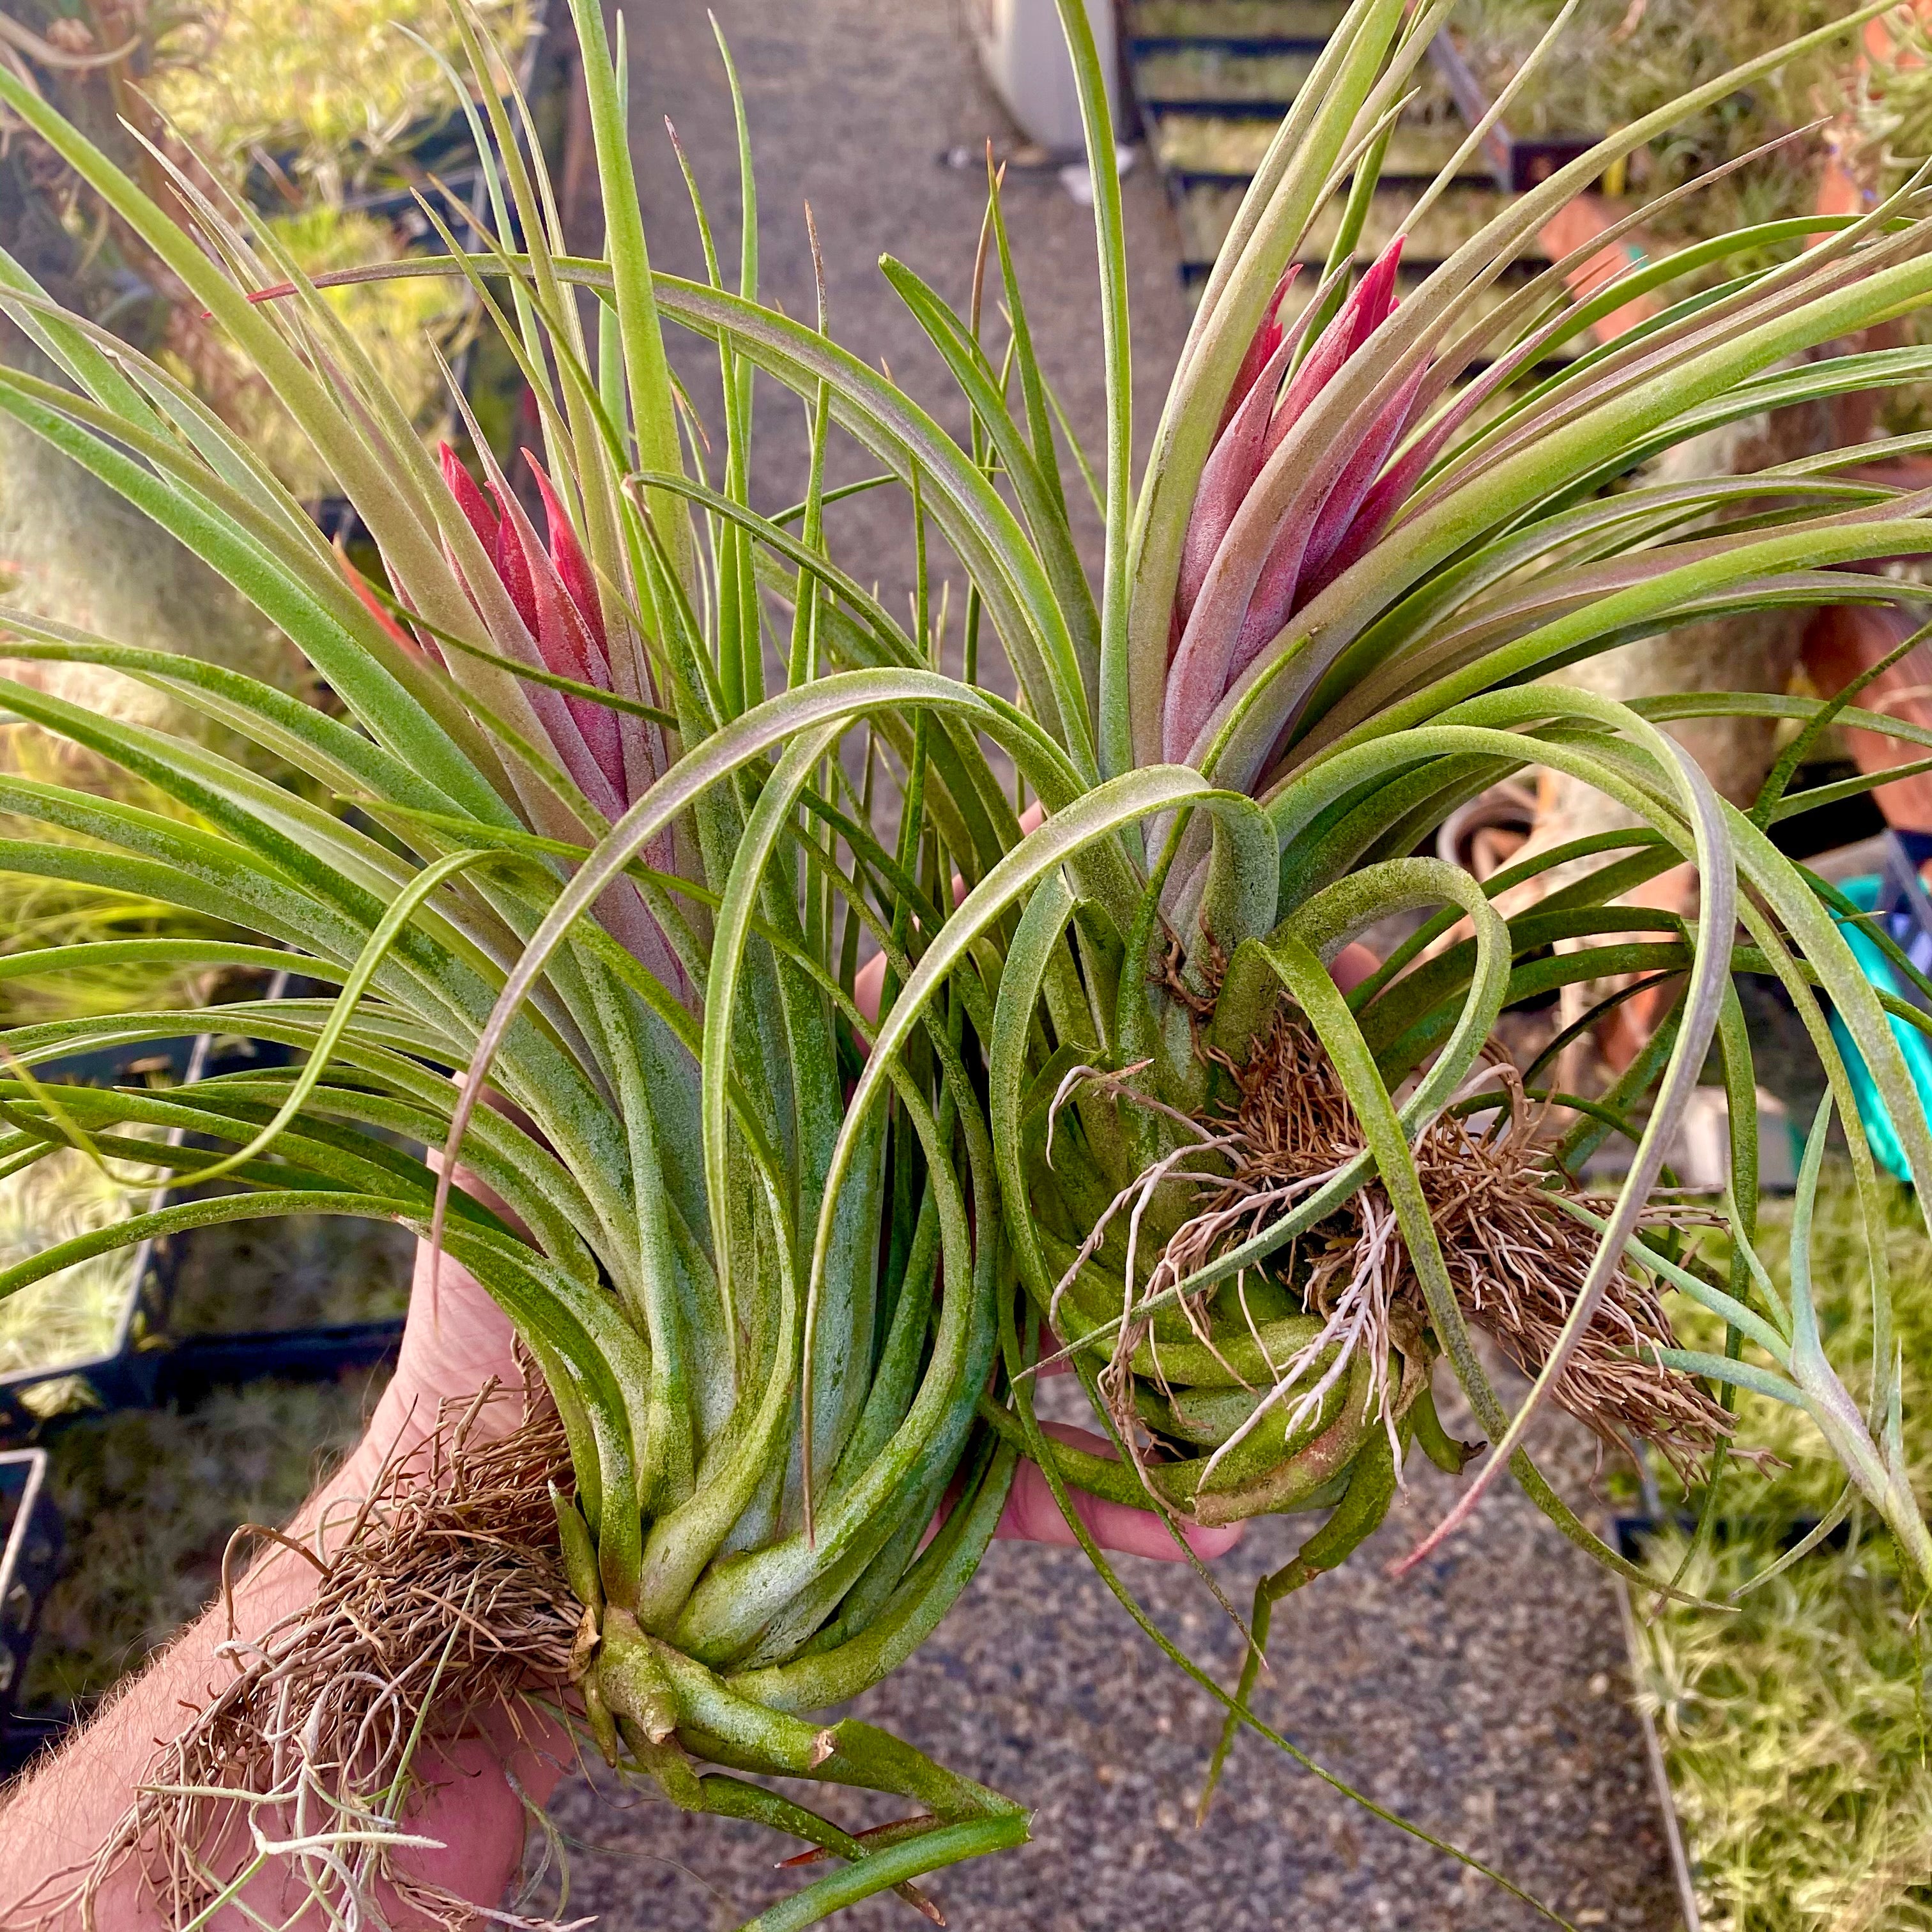 Large Exserta x Velutina <br> (Not in bloom but same size as pictured here)